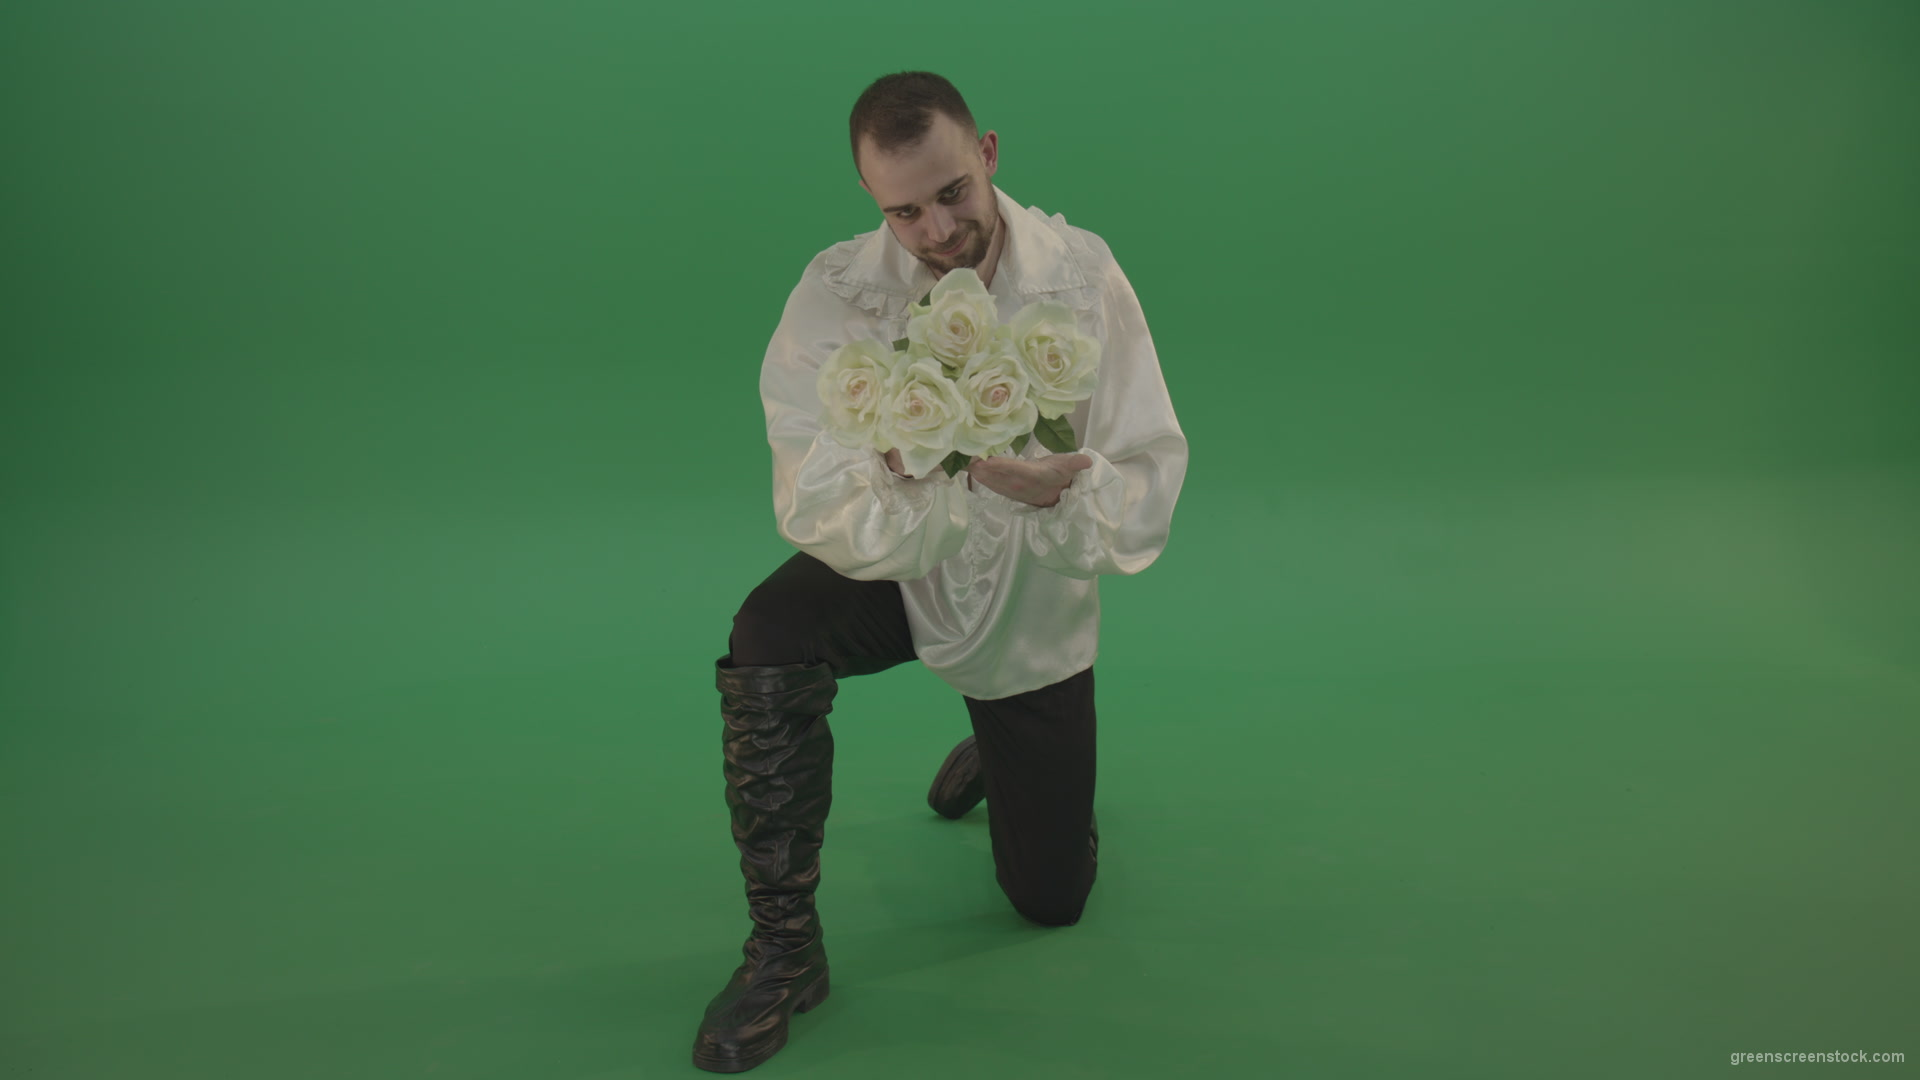 Medieval-man-gives-white-flowers-standing-on-one-knee-isolated-in-green-screen-studio_006 Green Screen Stock